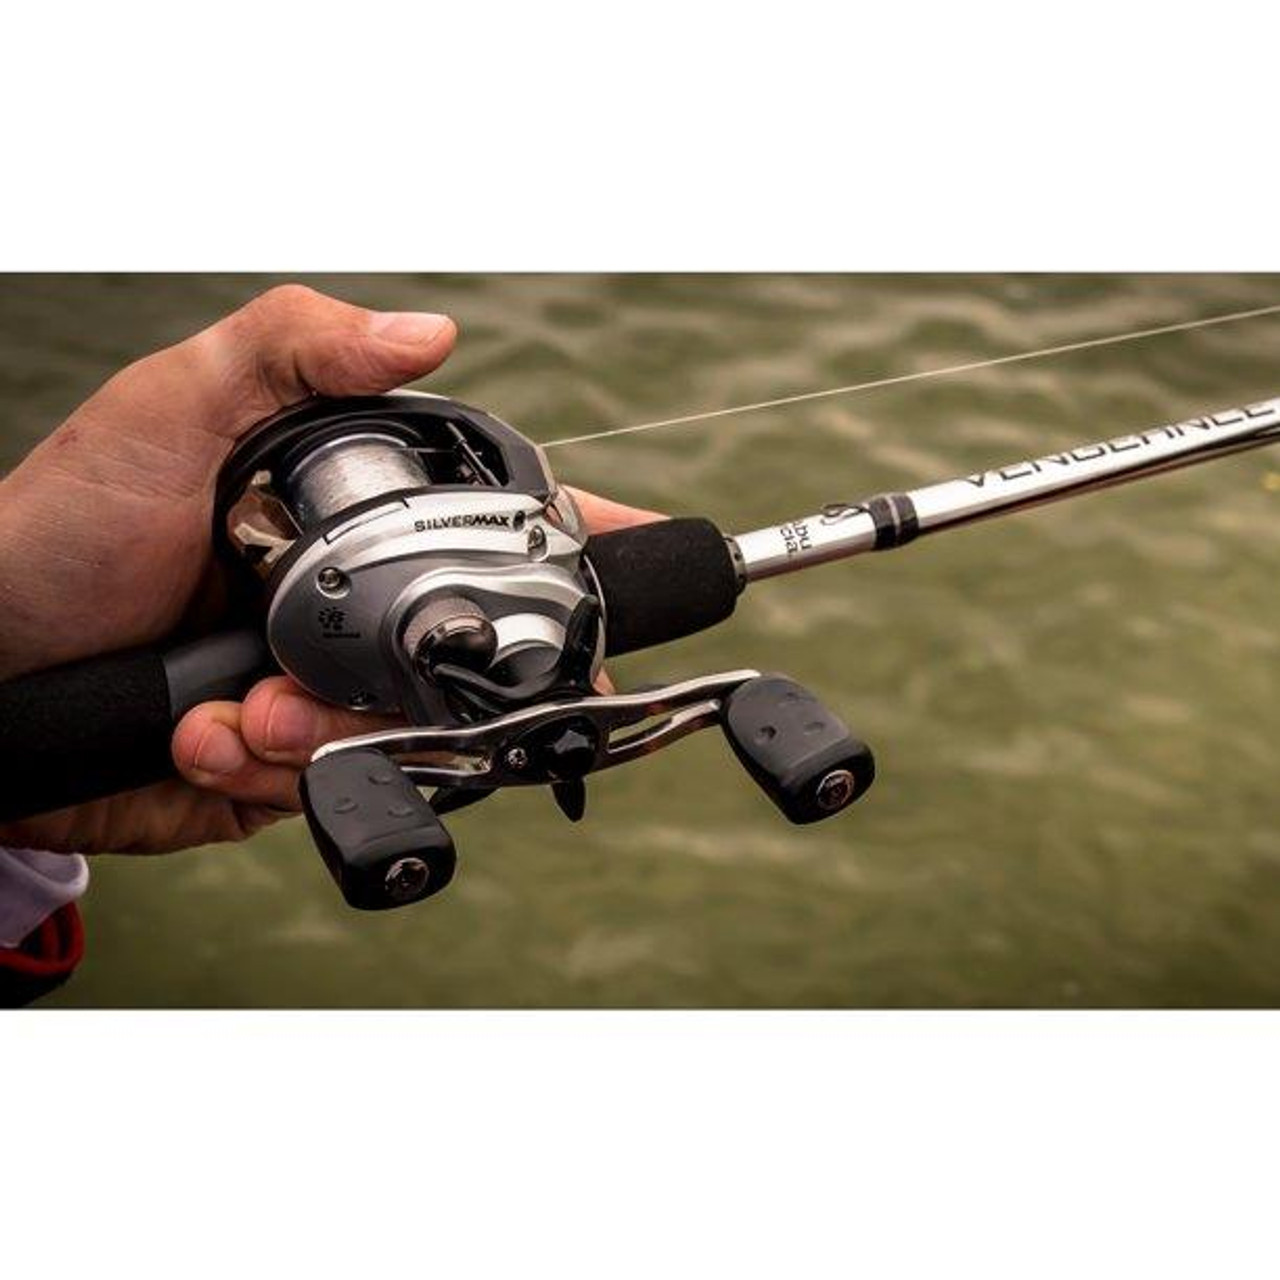 Abu Garcia Silver Max Baitcast Combo - Yeager's Sporting Goods